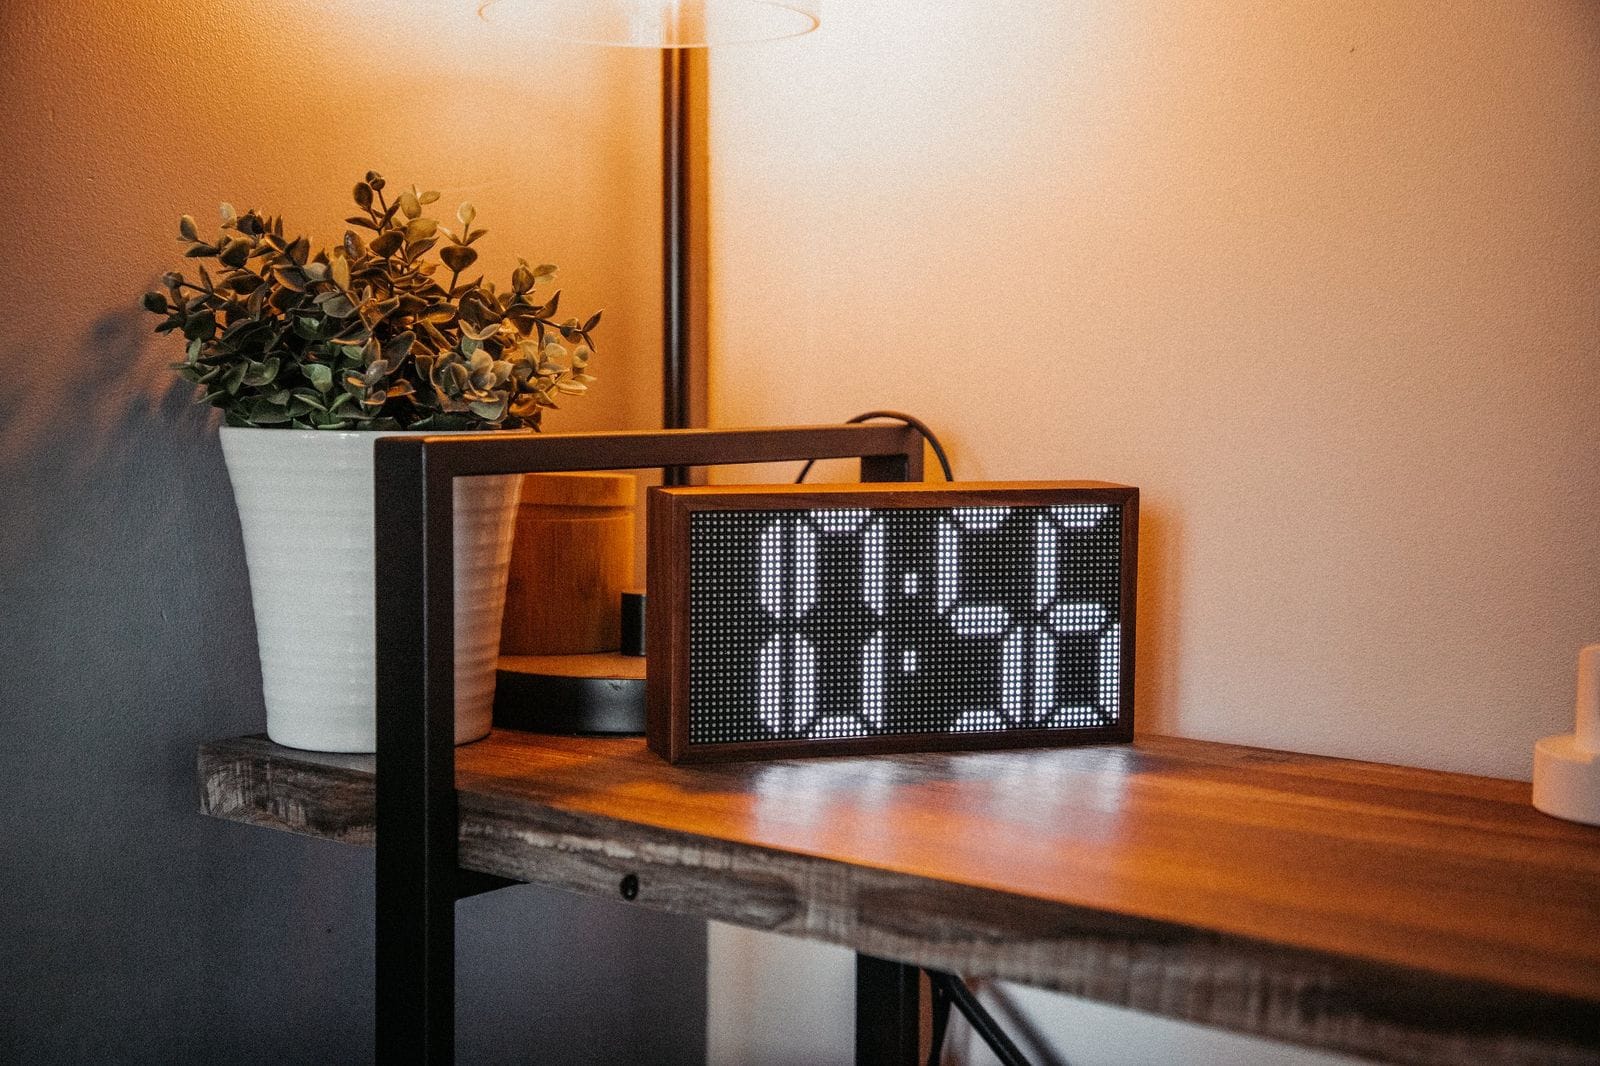 A wooden desk with a modern retro-style Tidbyt display showing digital art, flanked by a potted plant and a desk lamp, creating a cosy and tech-savvy workspace